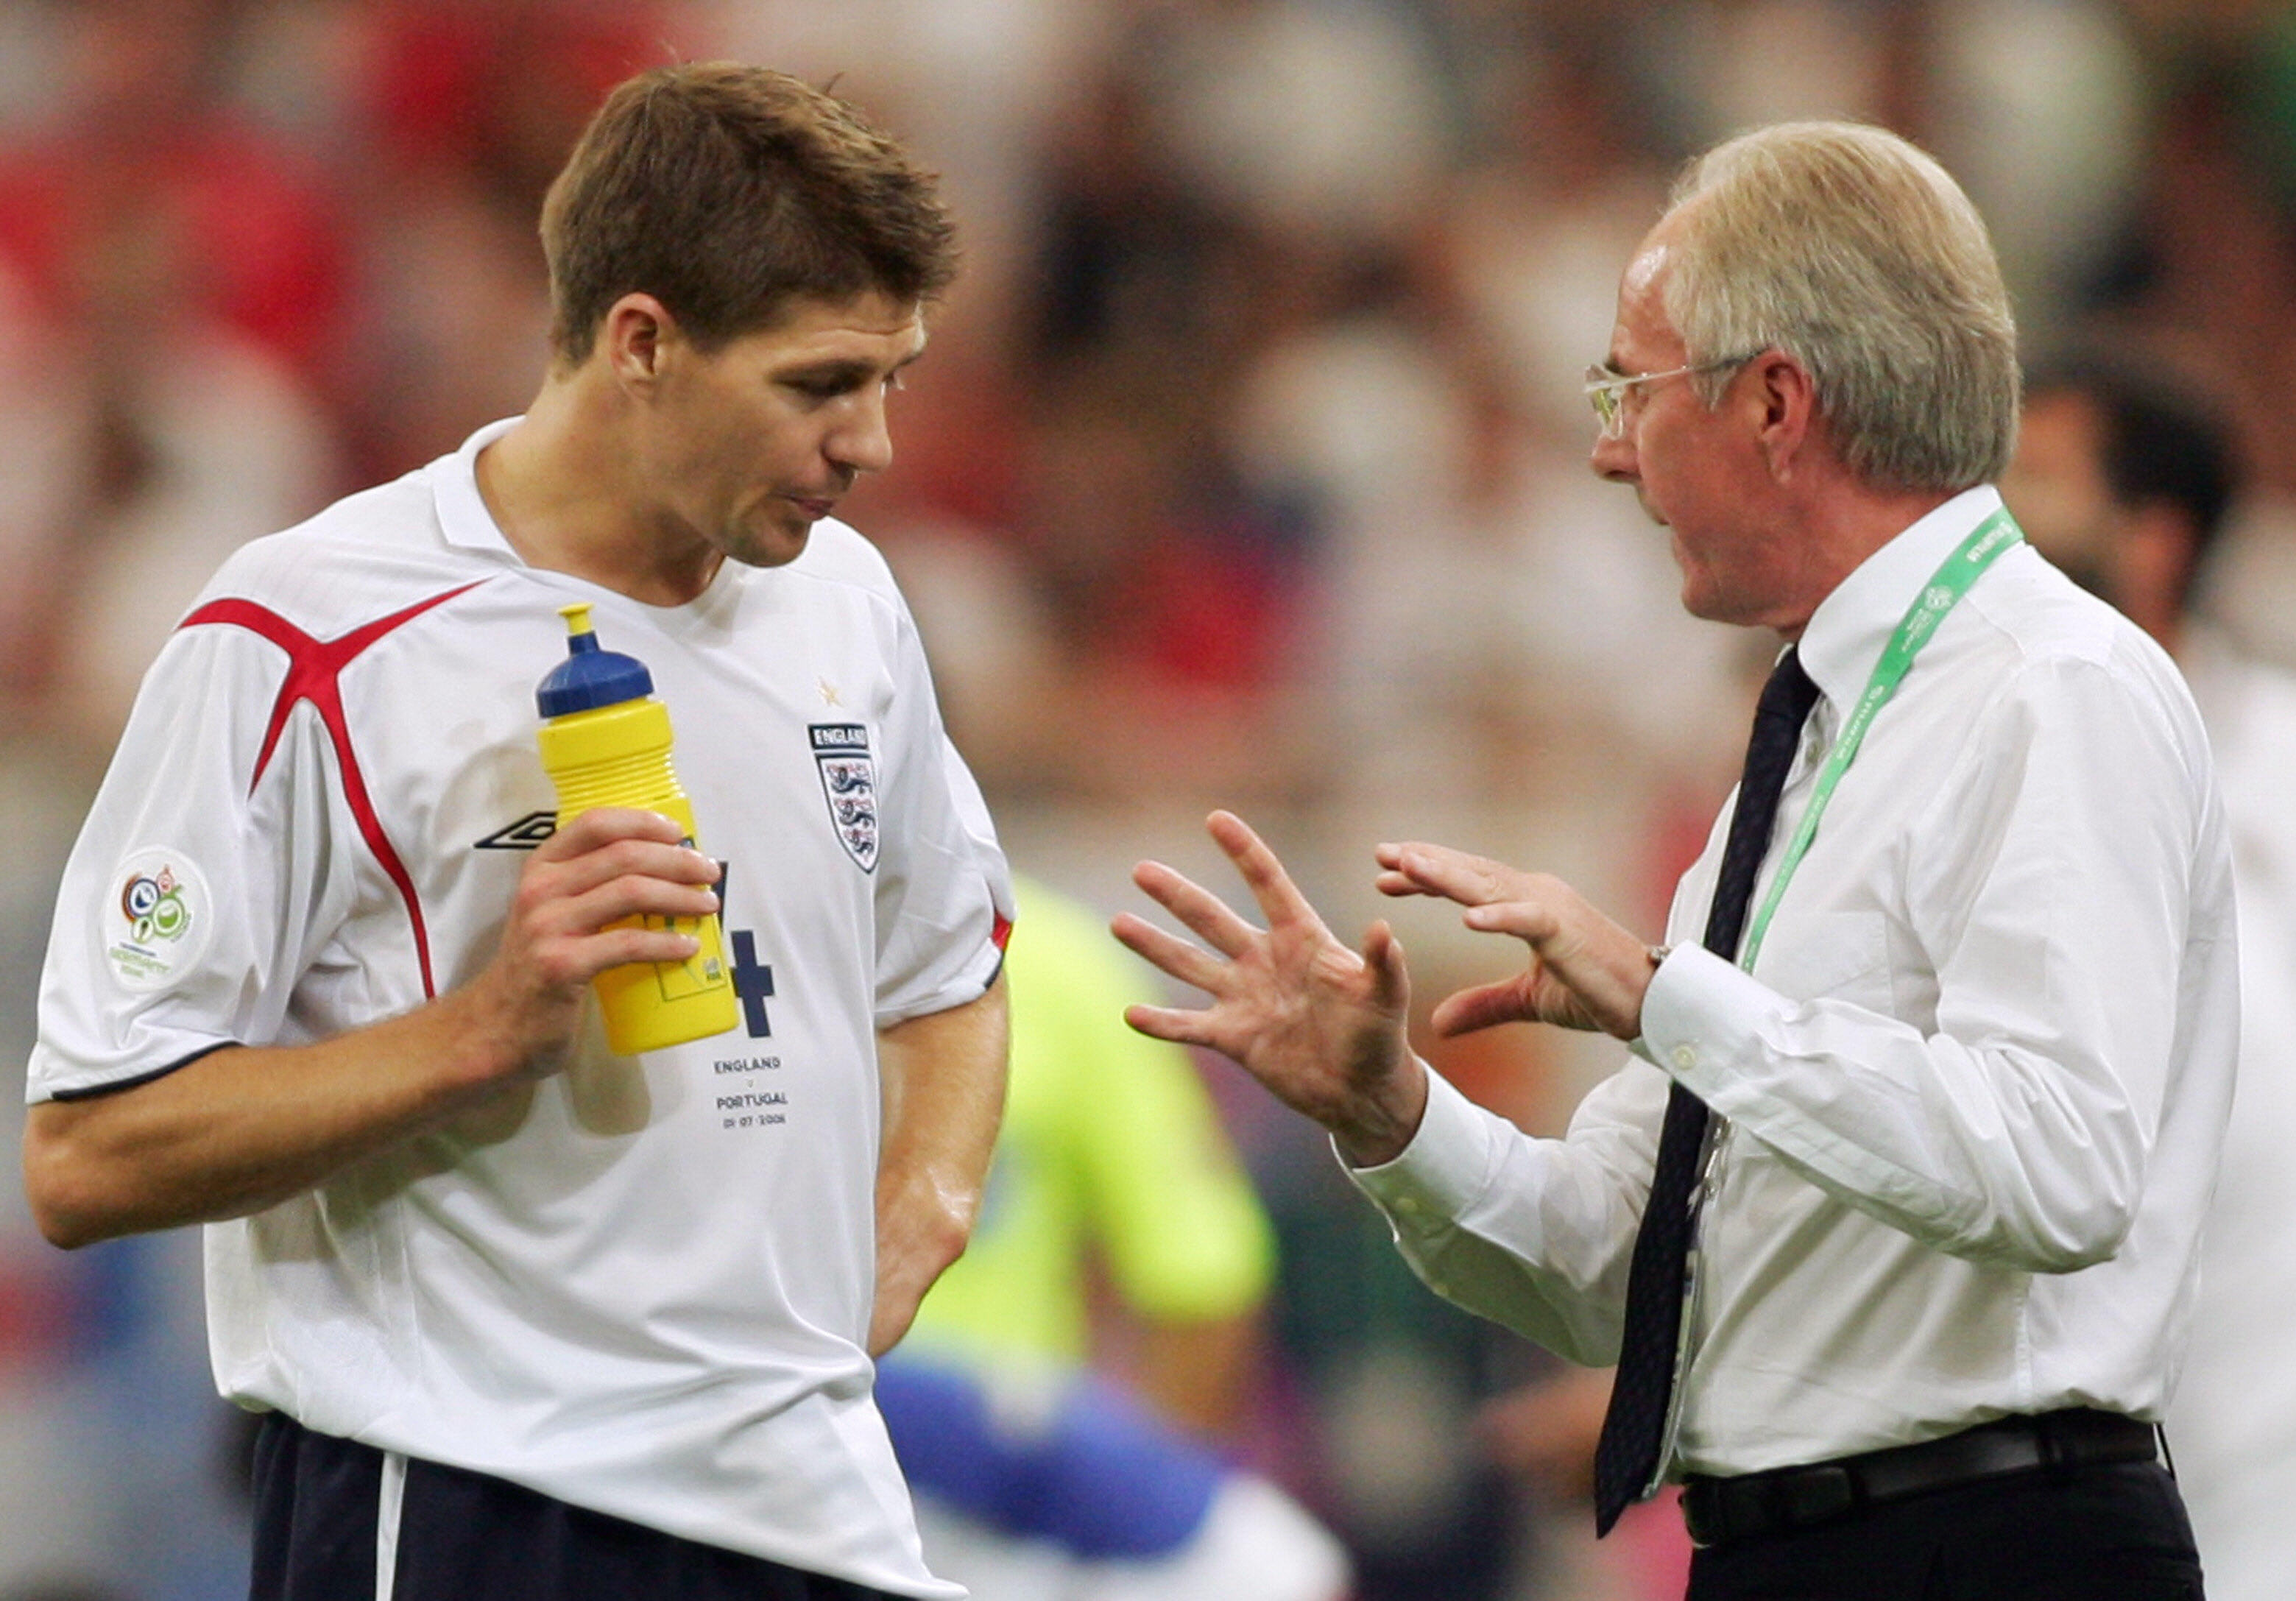 Most notable Liverpool players to play for the England national team